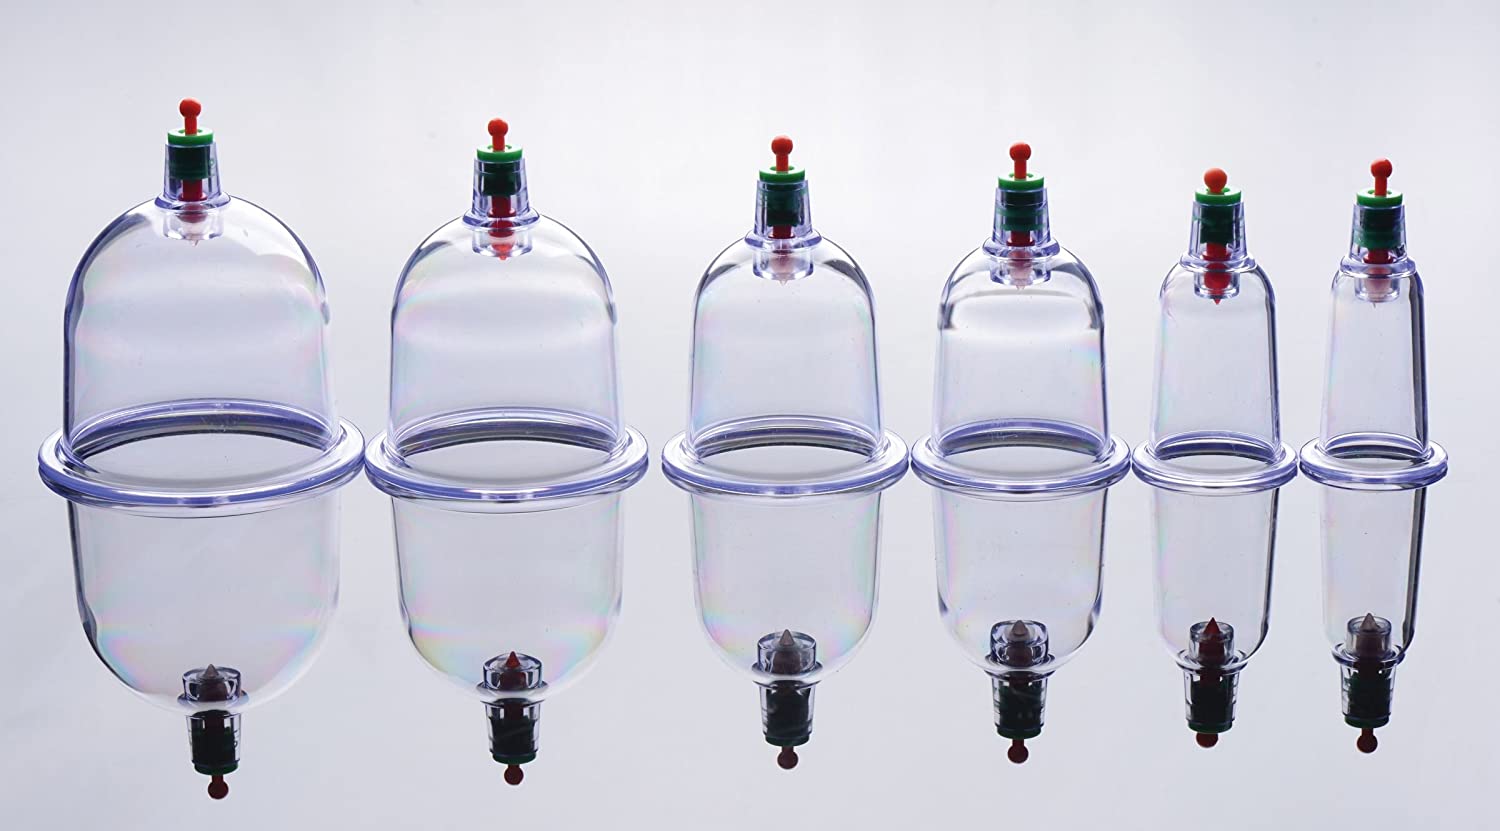 Sukshen 6 Piece Cupping Set with Acu-Points (6948177379492)